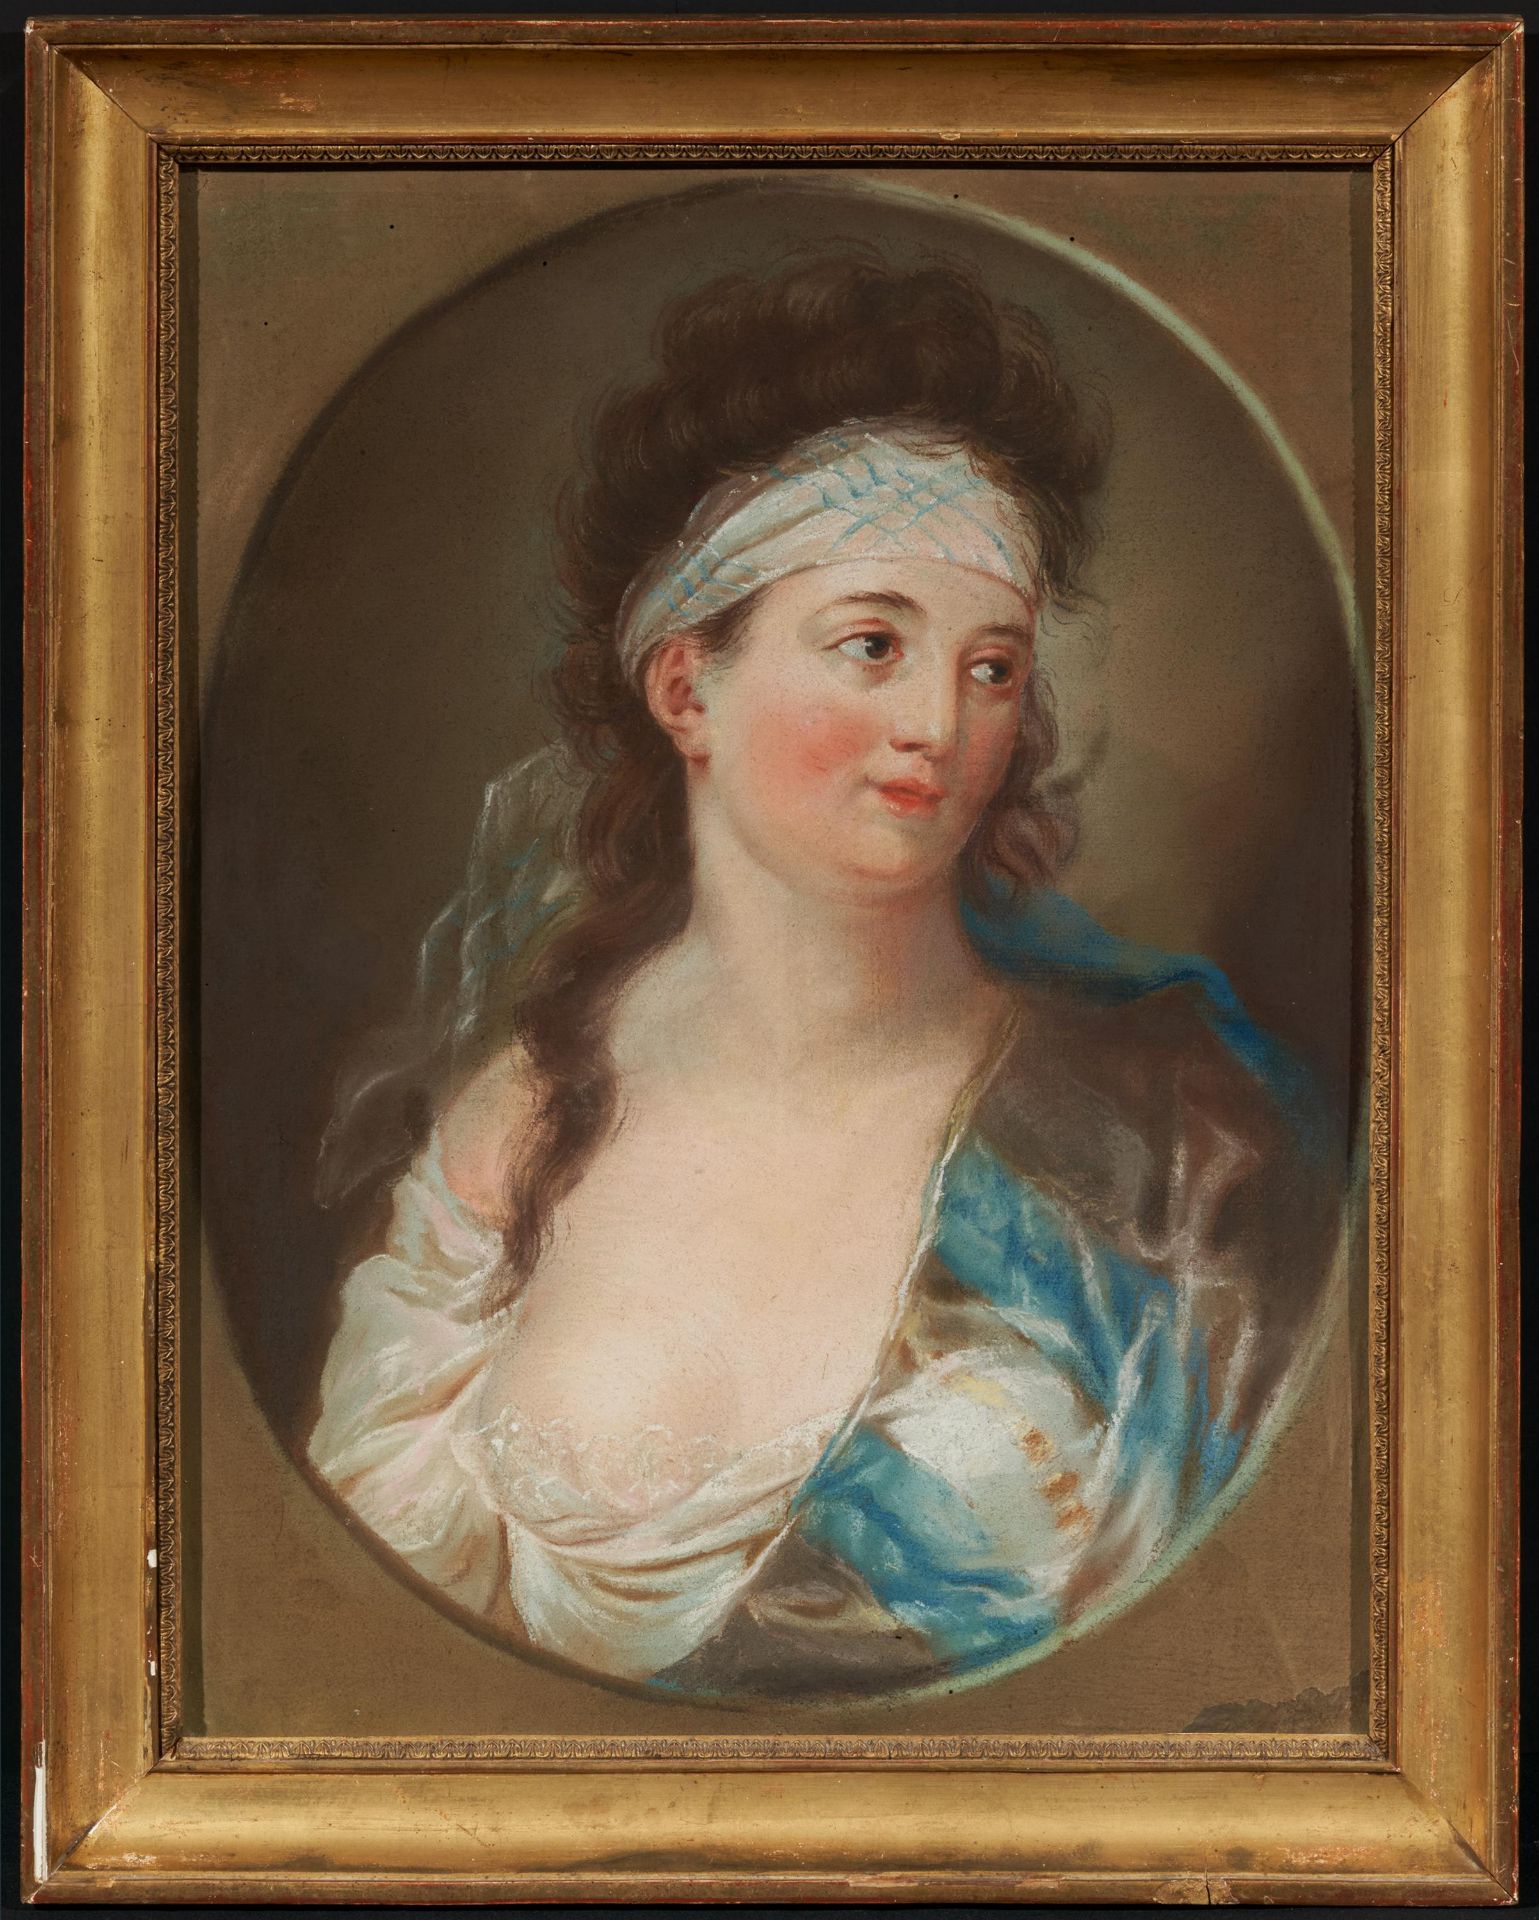 Anna Dorothea Therbusch: Portrait of a Lady (the Dancer Anna Frederica Heinel?) - Image 2 of 4